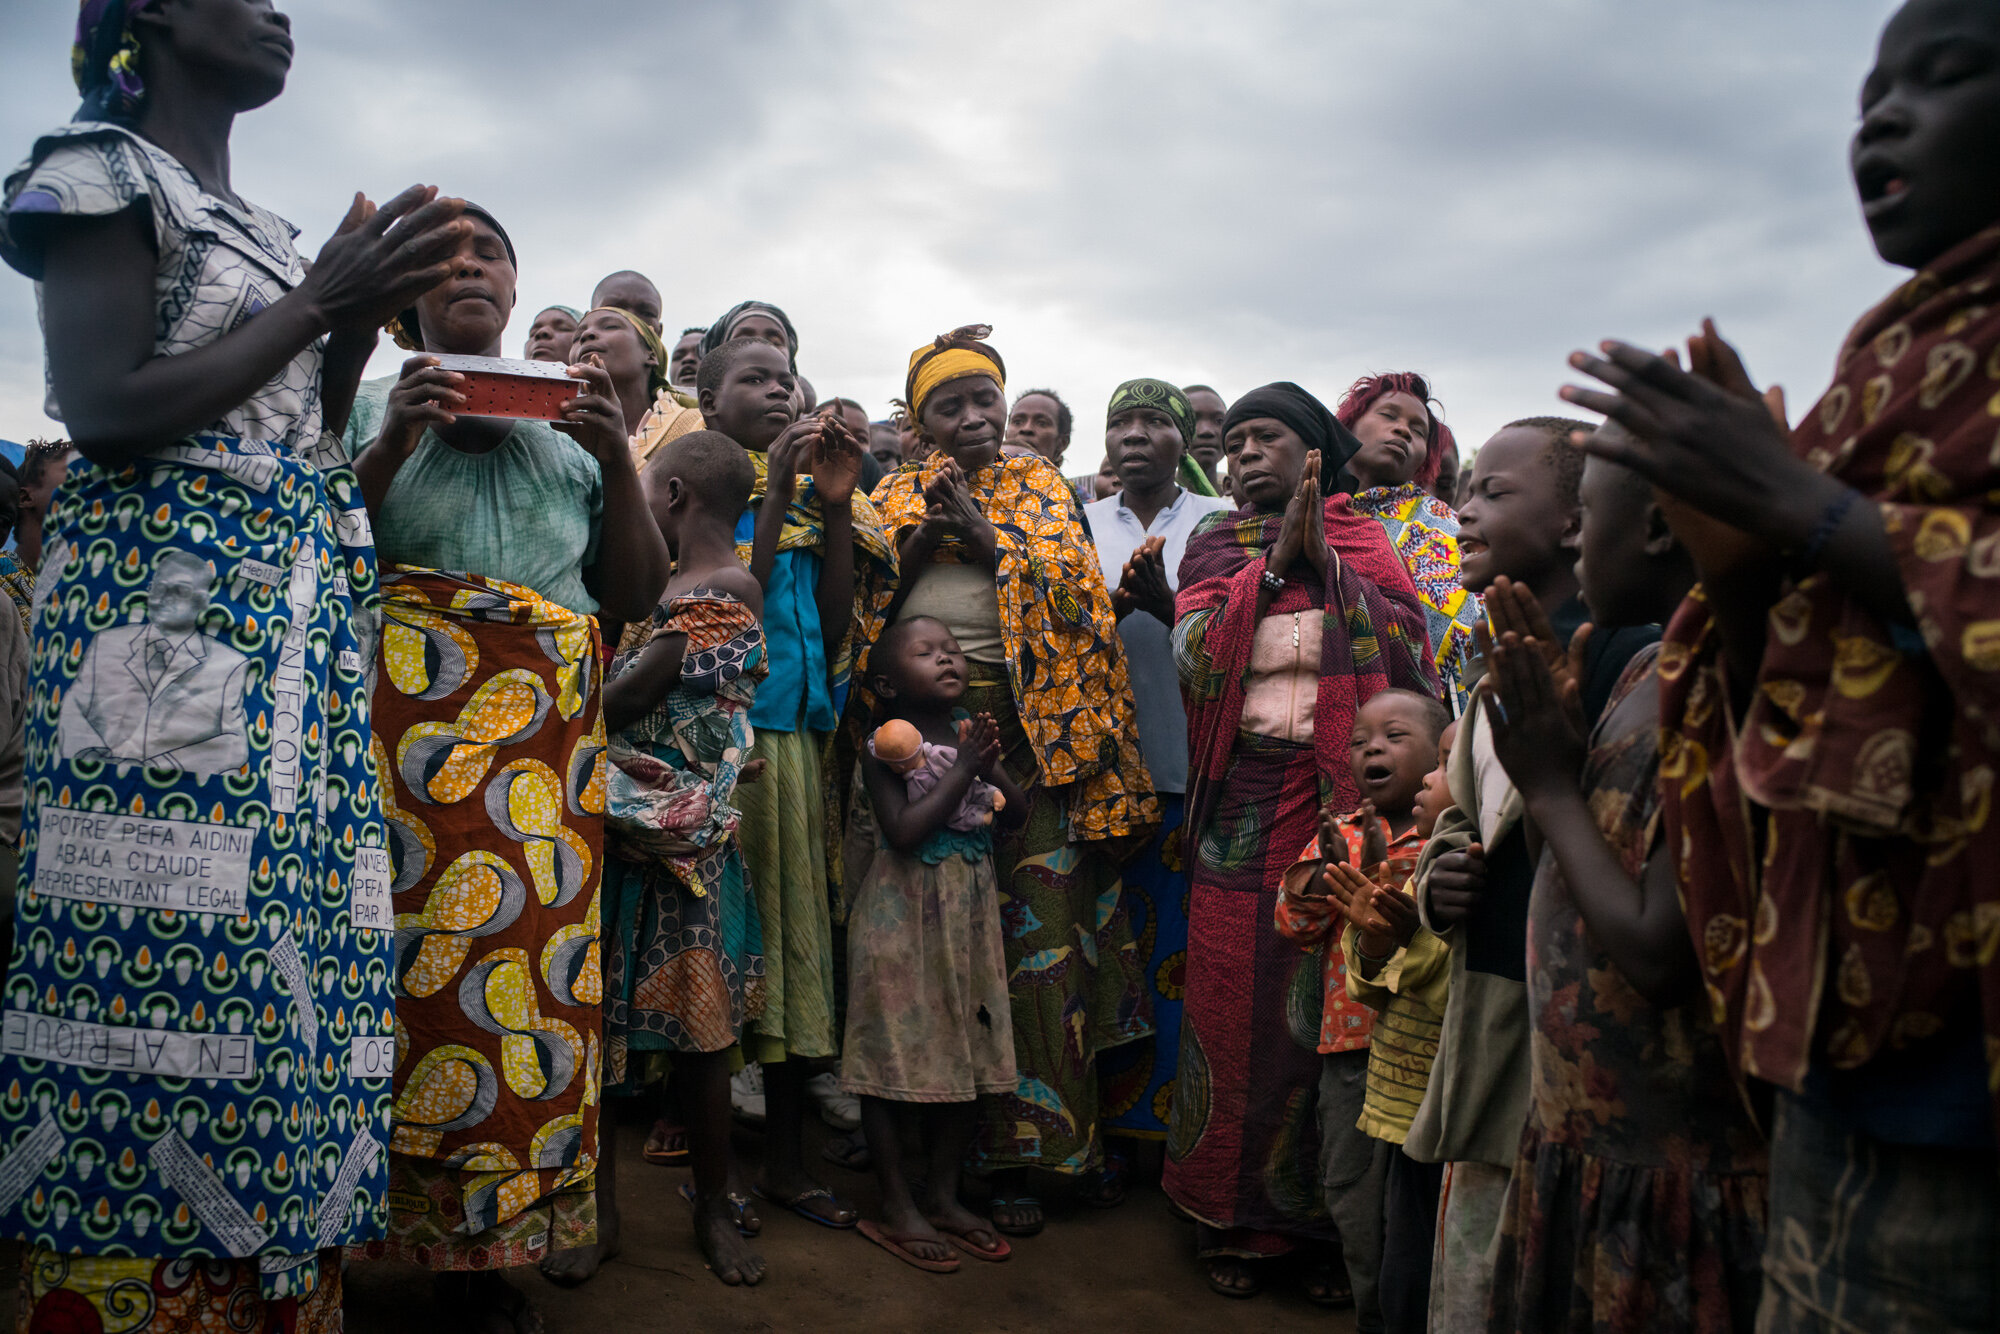  IDPs attend a sermon in the largest camp in Bunia, host to approximately 10,0000 people.  A second camp in Bunia hosts apporximately 4400 people. According to UN OCHA, the total number of those displaced to Bunia, living in camps and with host famil